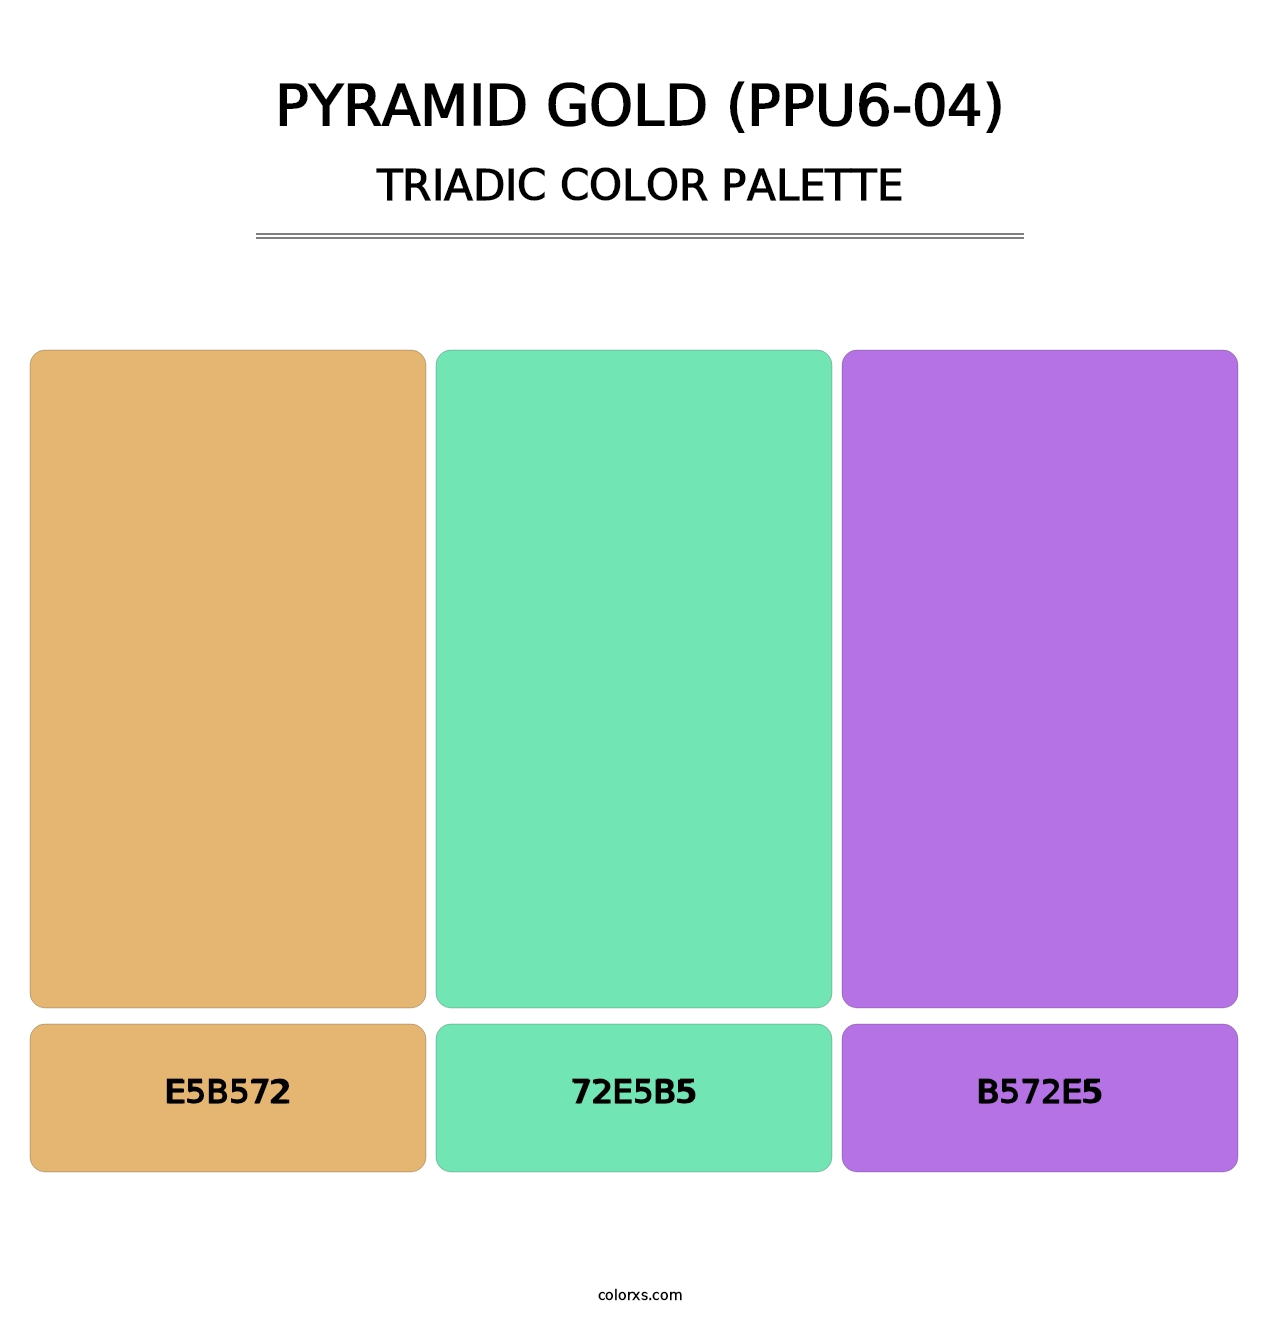 Pyramid Gold (PPU6-04) - Triadic Color Palette